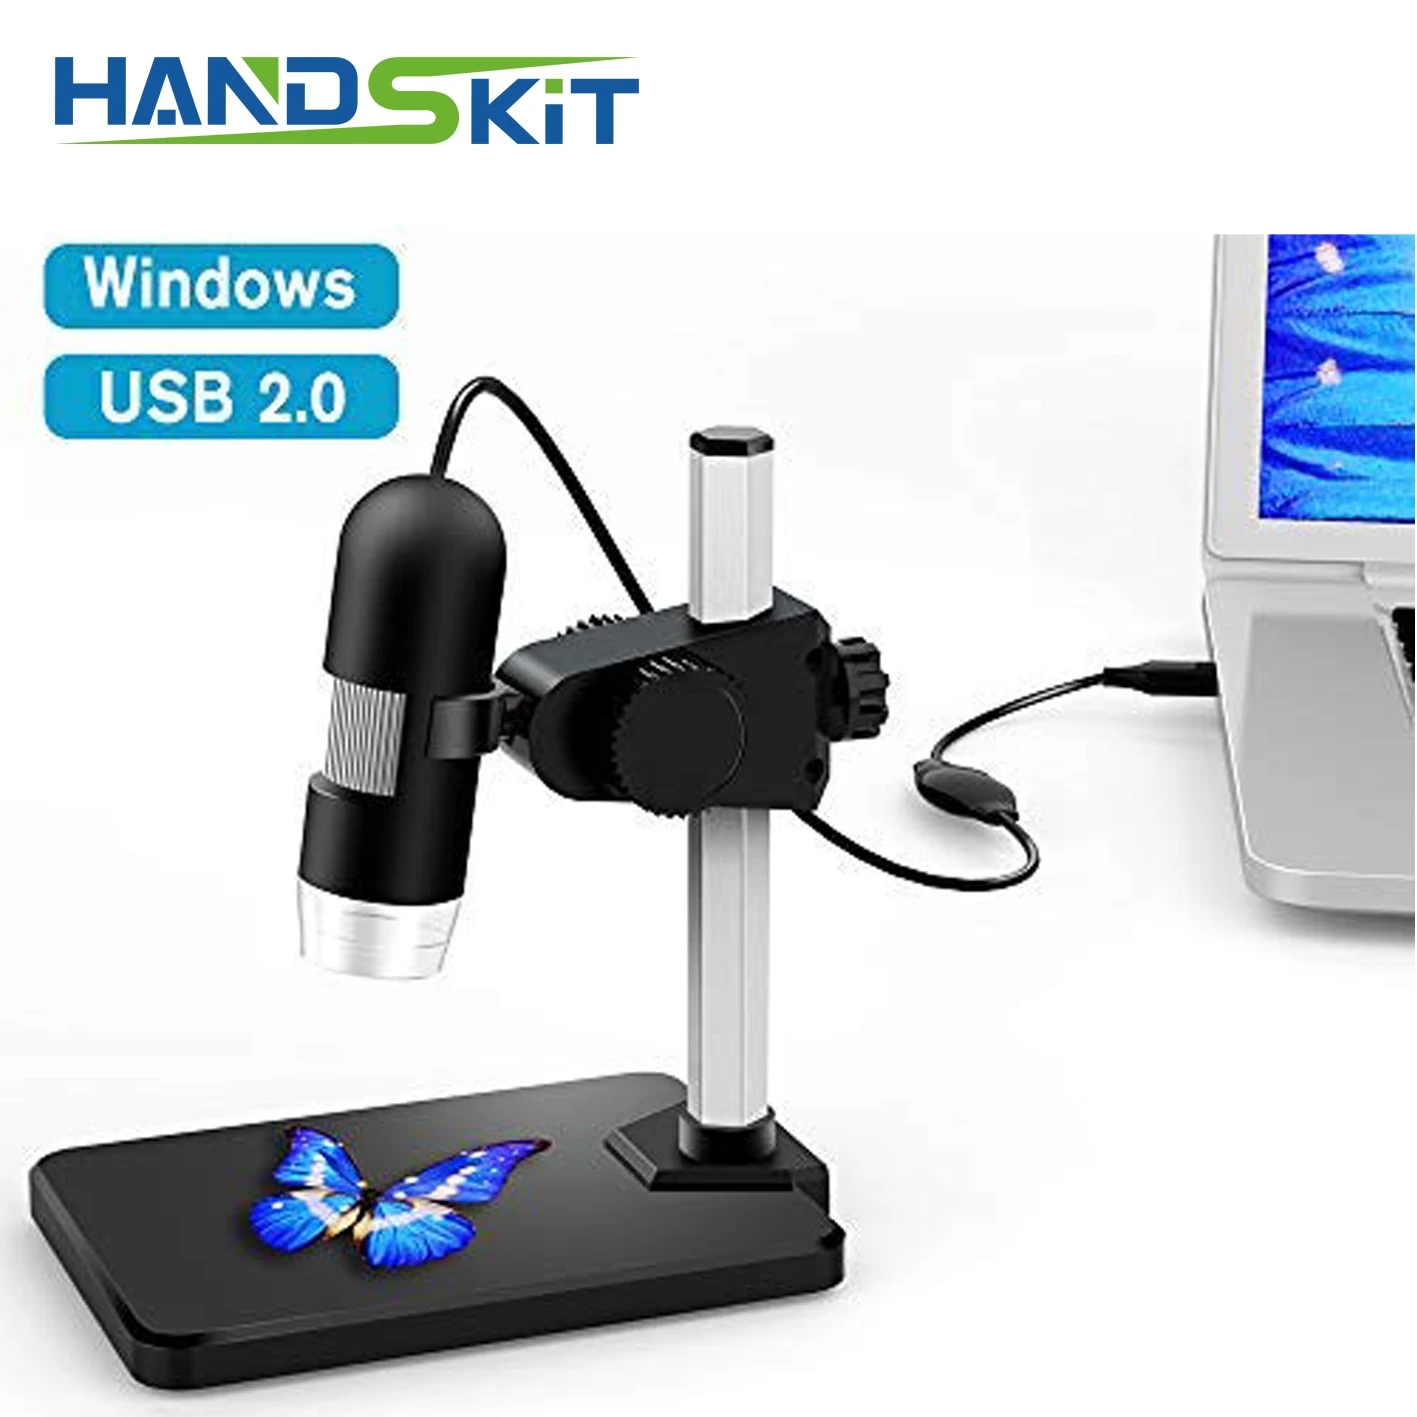 

USB 2.0 Digital Microscope, DEPSTECH 1 to 1000X Magnification Endoscope, 5X Zoom Mini Inspection Camera with 8 Adjustable LED